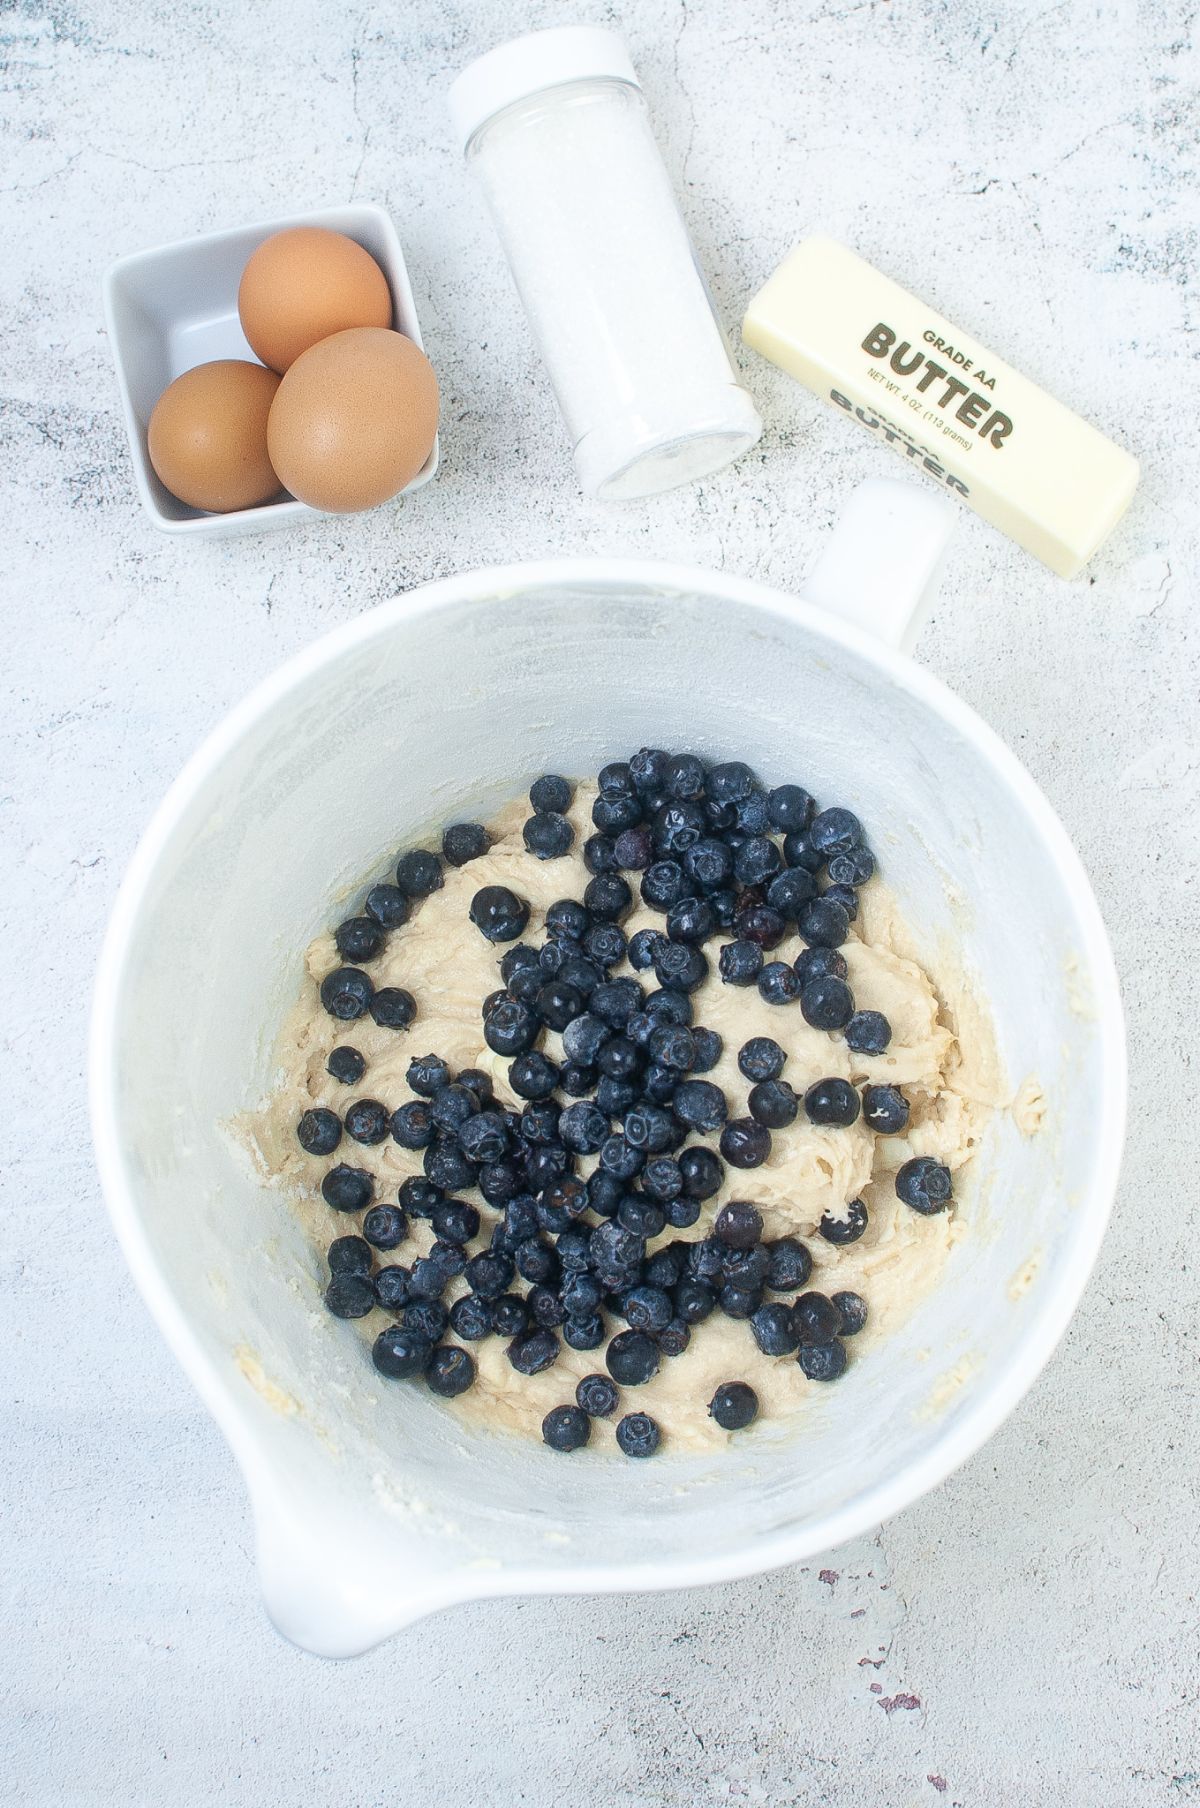 The blueberries are added to the batter.